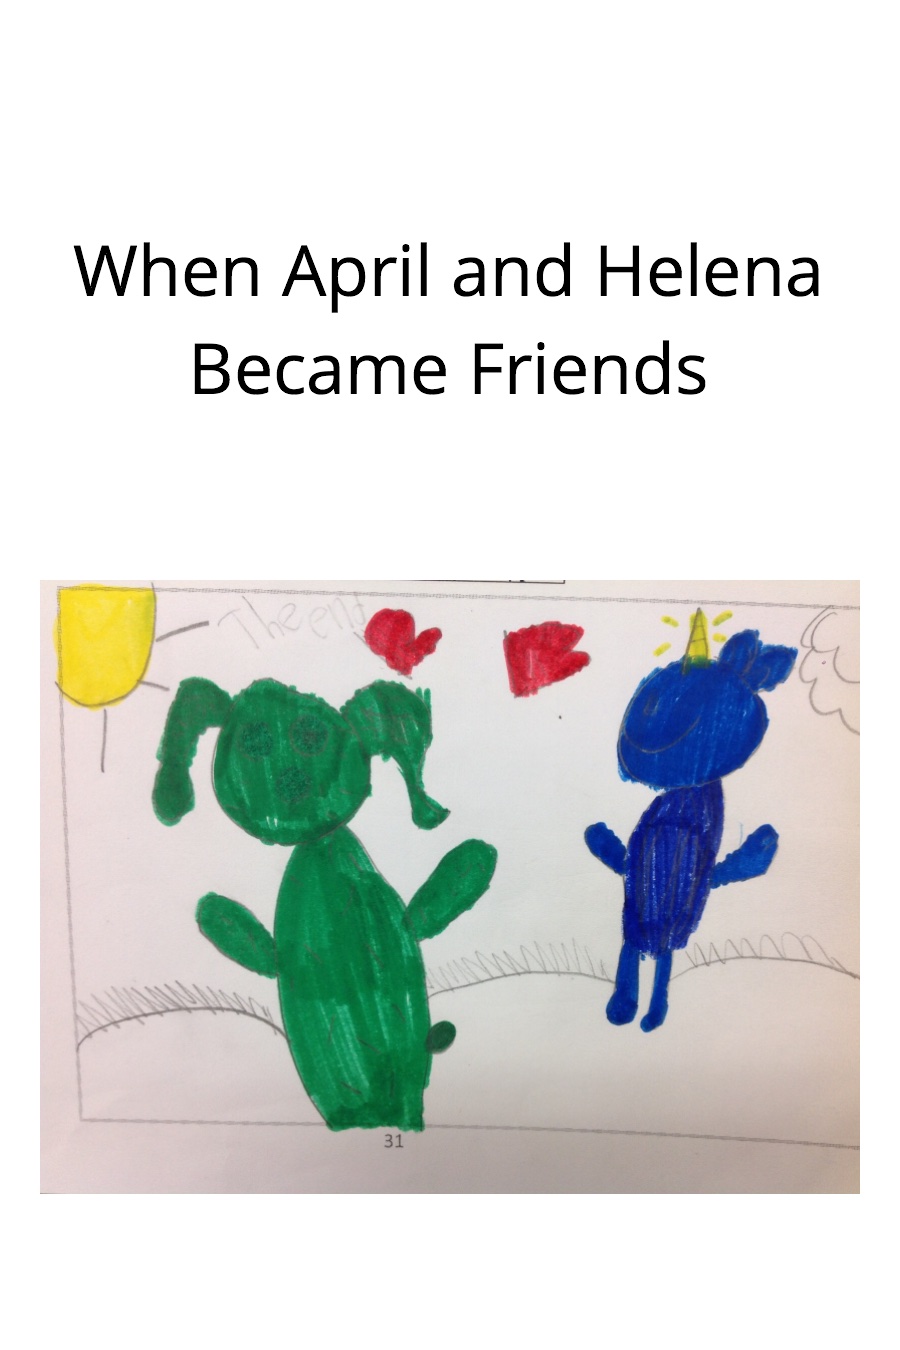 When April and Helena Became Friends by Peyton W